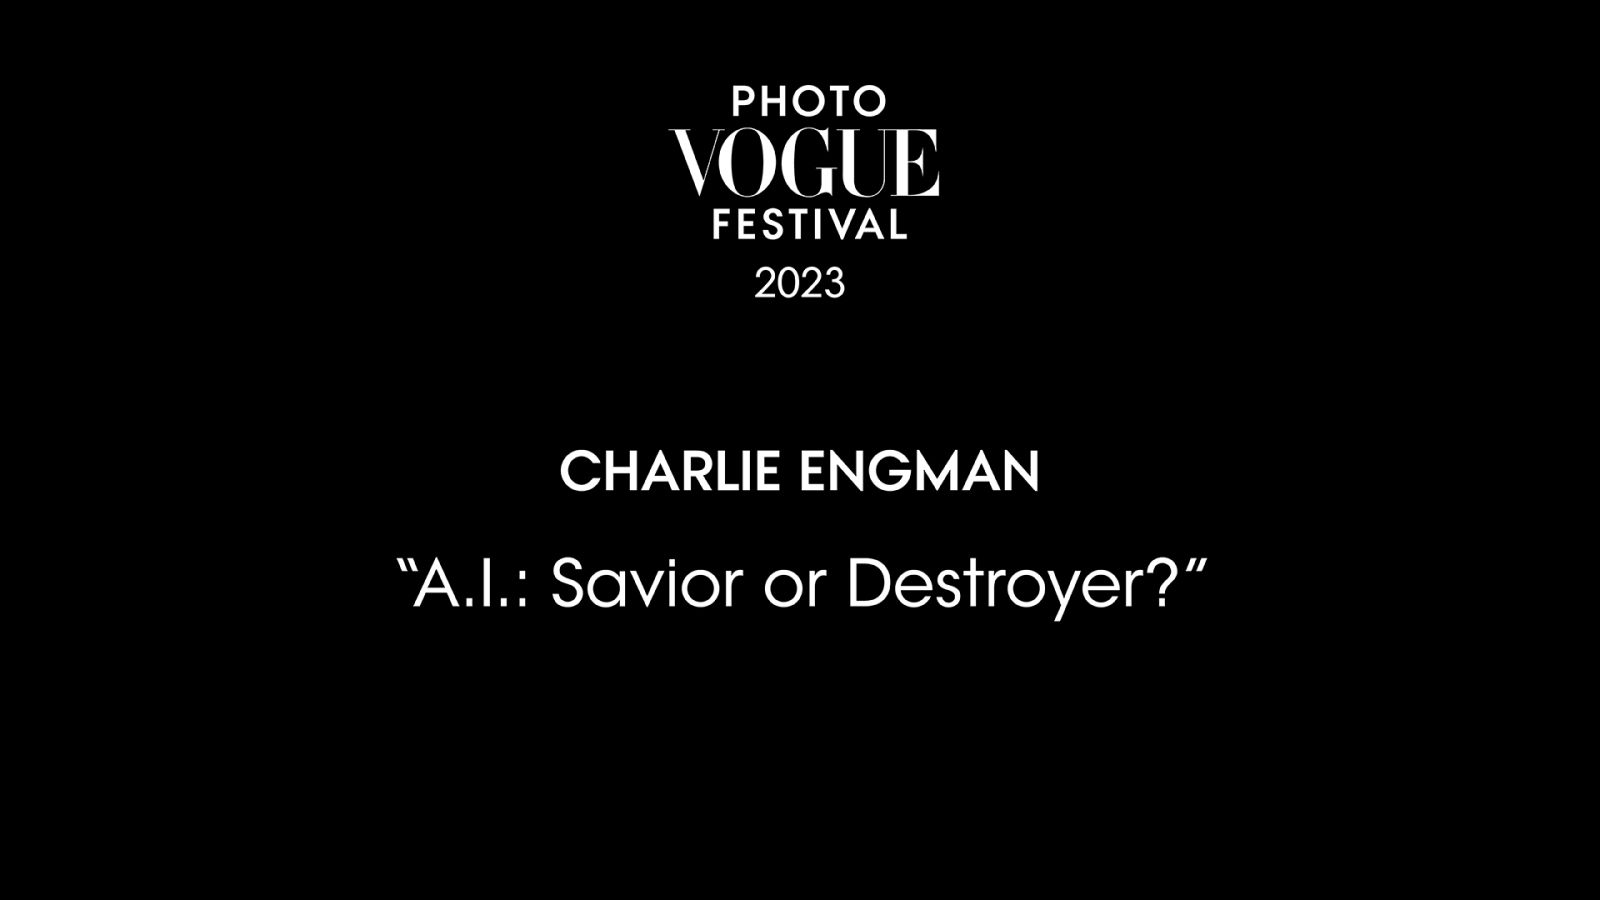 A.I.: Savior or Destroyer? | PhotoVogue Festival 2023: What Makes Us Human? Image in the Age of A.I.